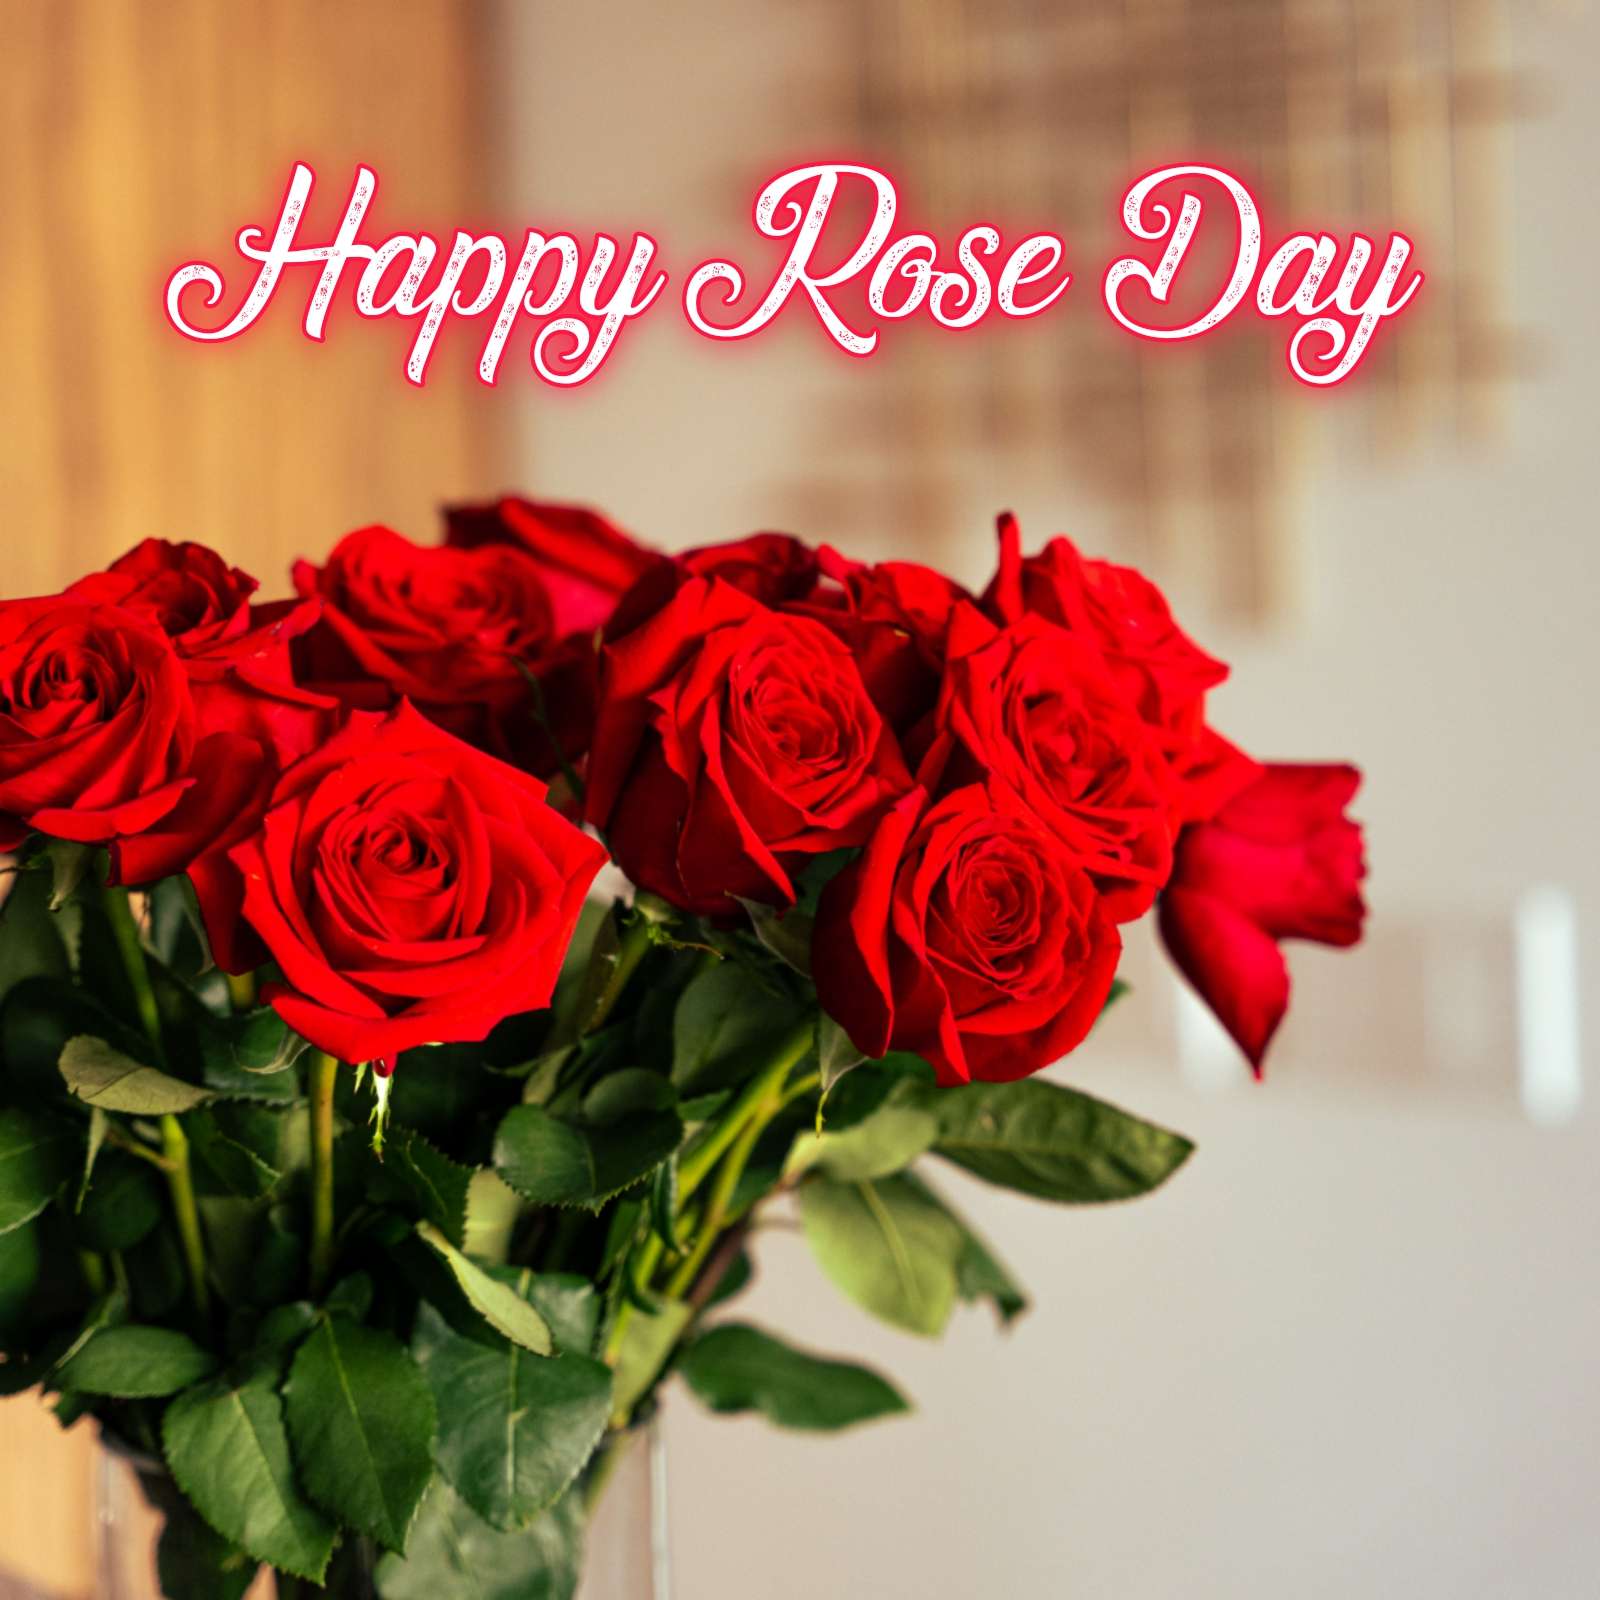 Happy Rose Day Husband Images